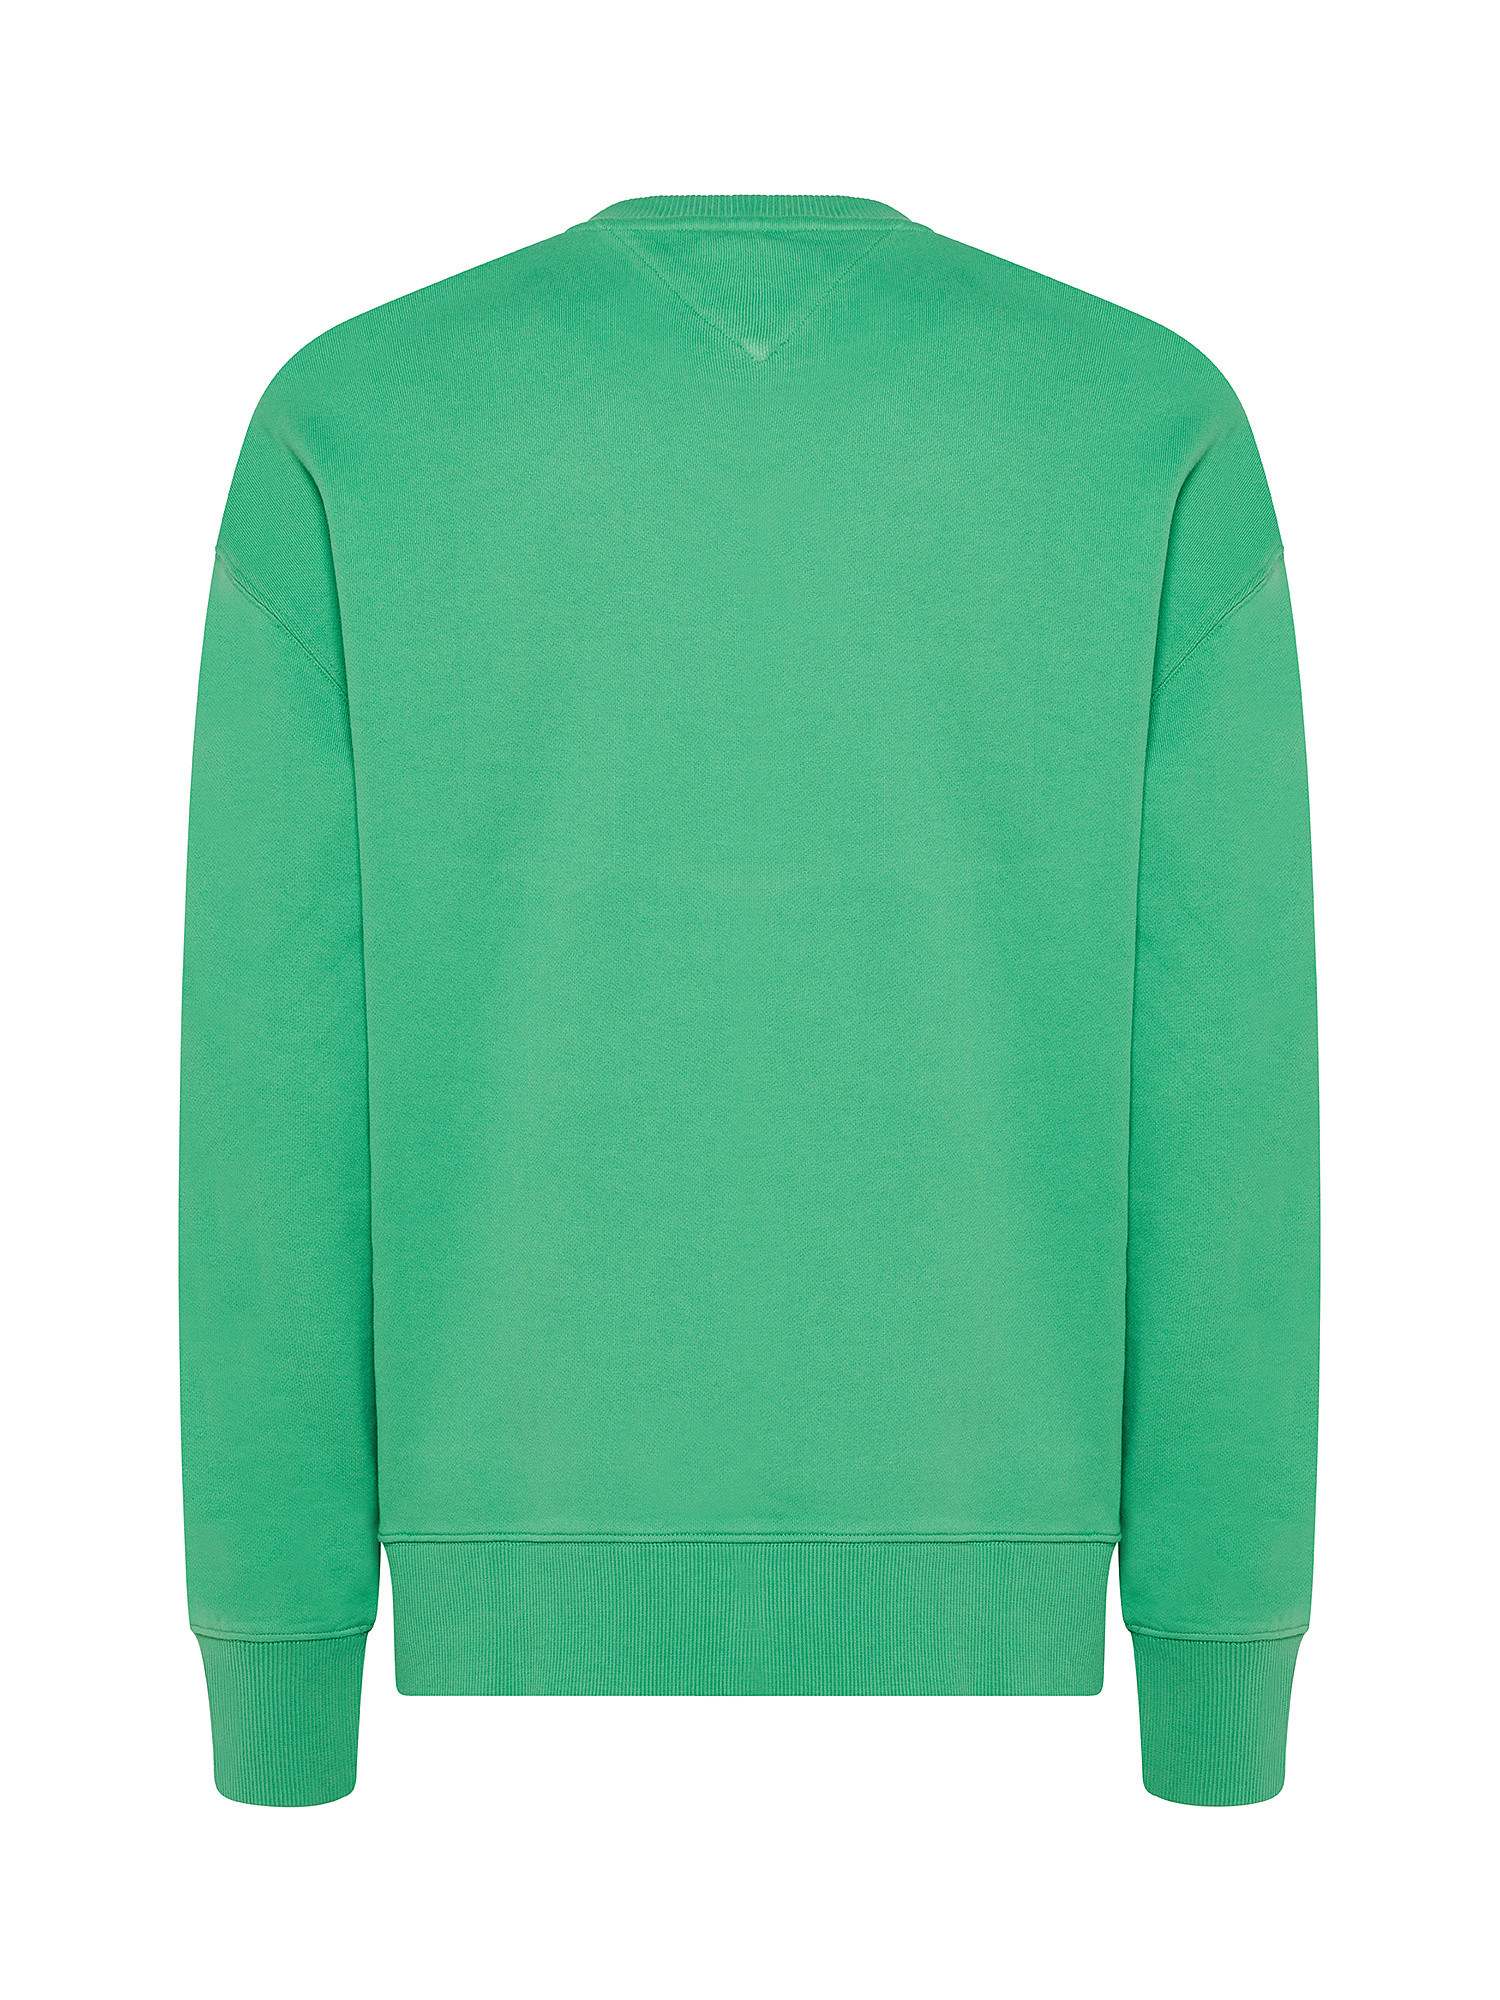 Tommy Jeans - Felpa girocollo in cotone con micrologo, Verde, large image number 1